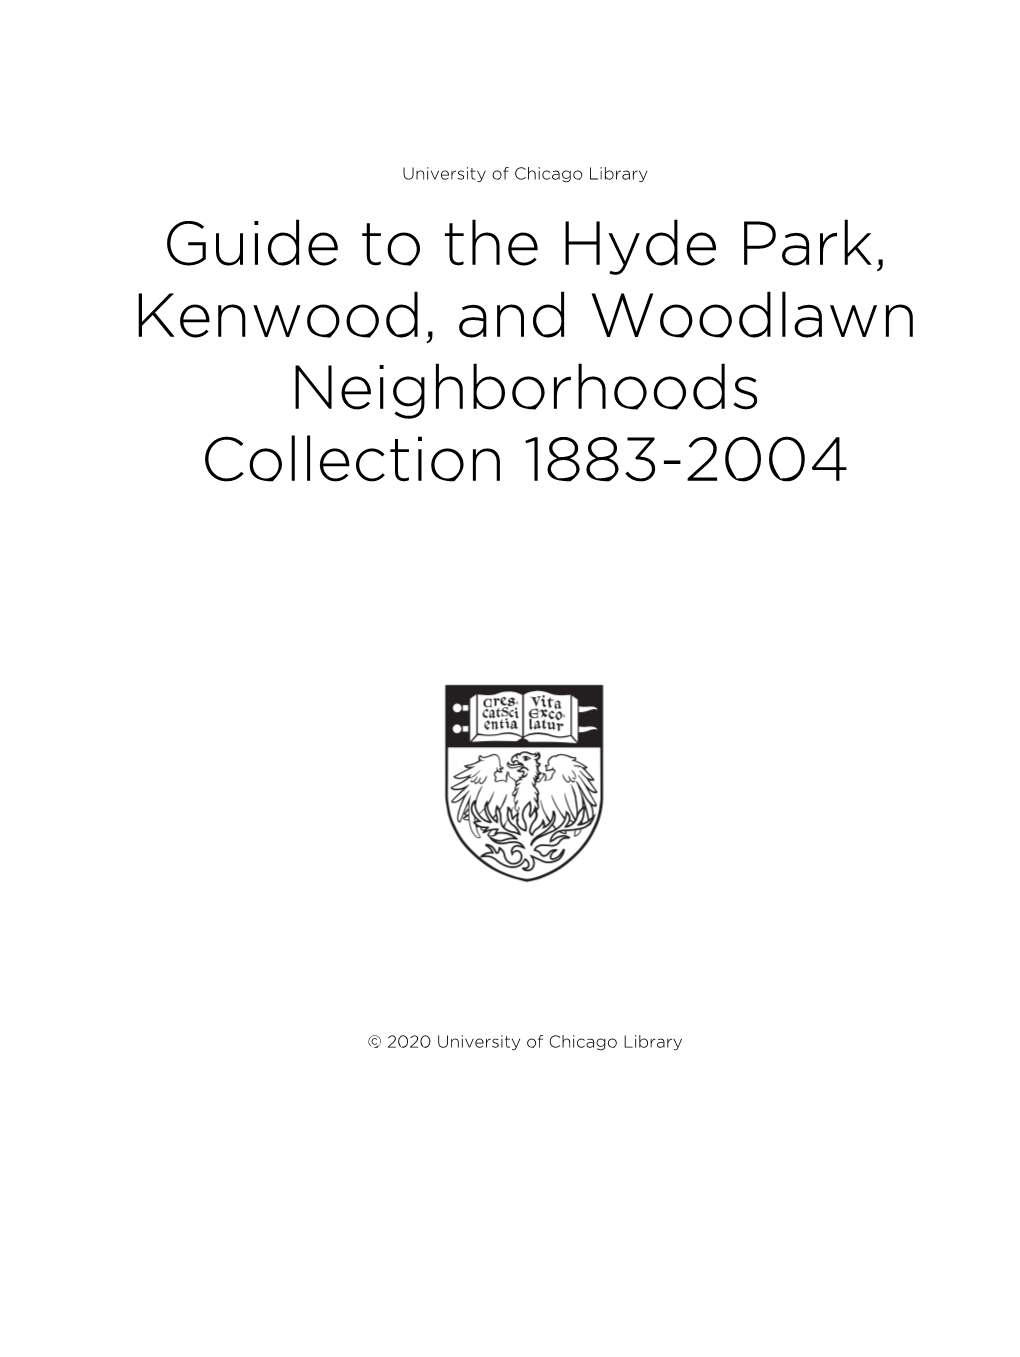 Guide to the Hyde Park, Kenwood, and Woodlawn Neighborhoods Collection 1883-2004